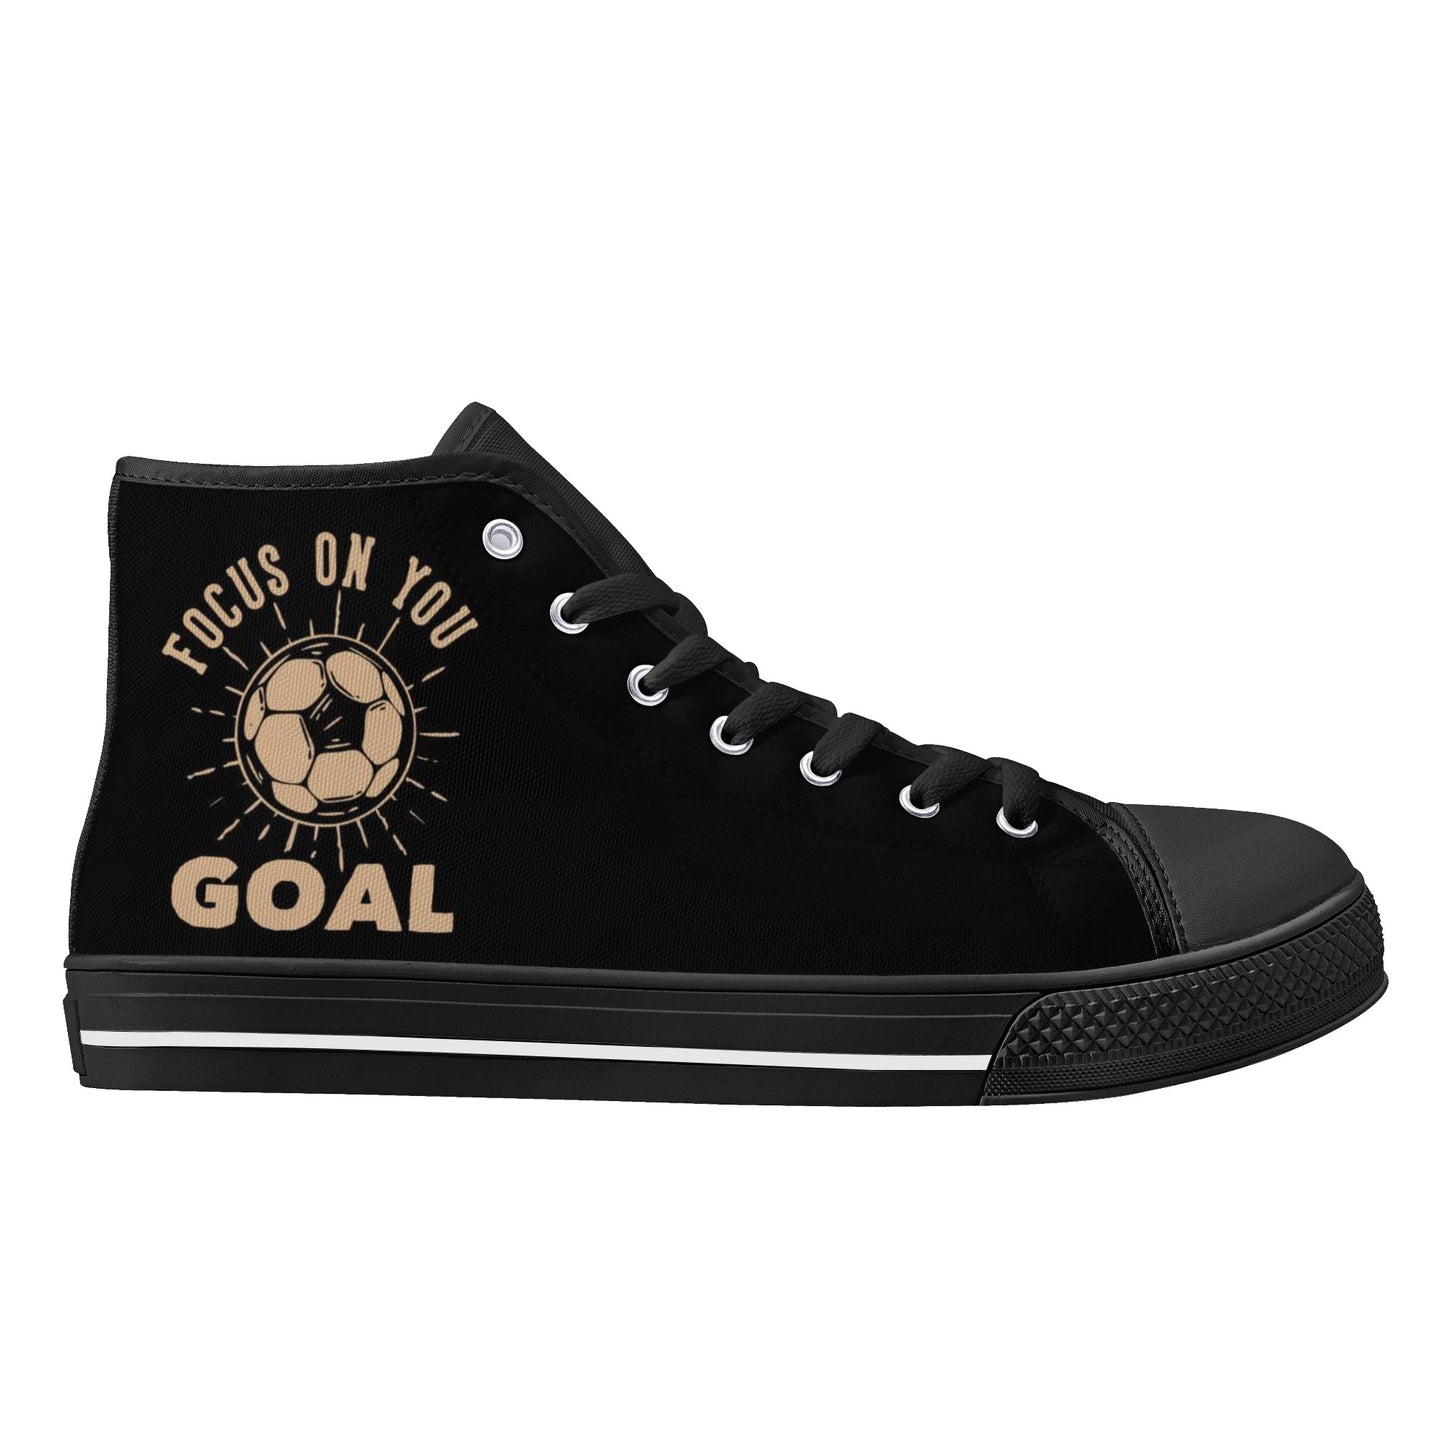 Focus on Your Goal High Top Canvas Shoes